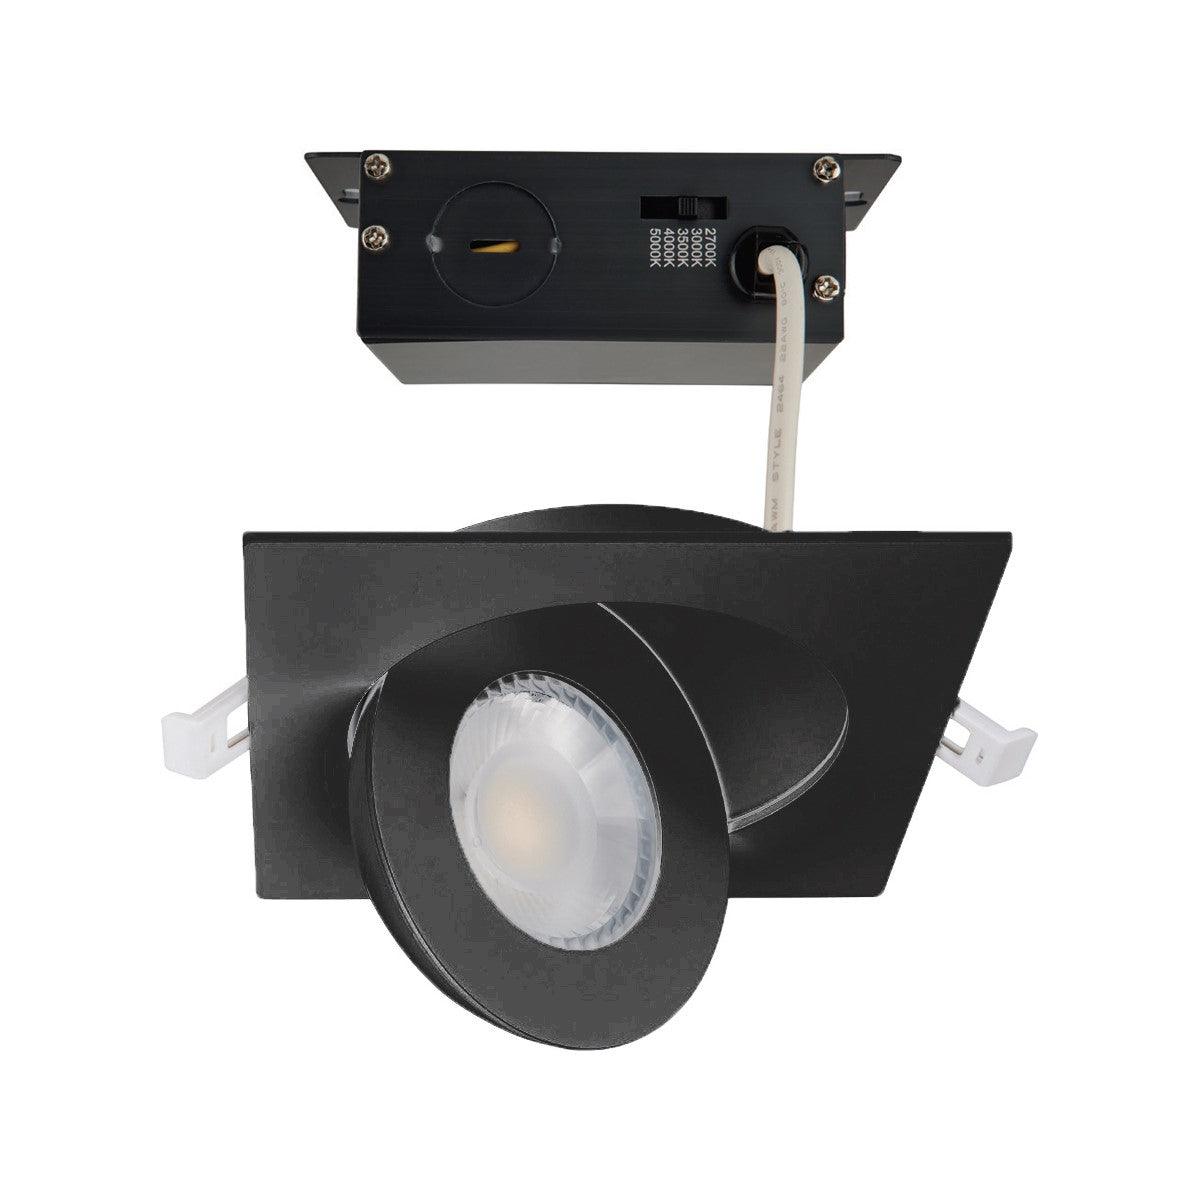 4 Inch Gimbal Canless LED Recessed Light, Square, 9 Watt, 750 Lumens, Selectable CCT, 2700K to 5000K, Remote Driver, Black Finish